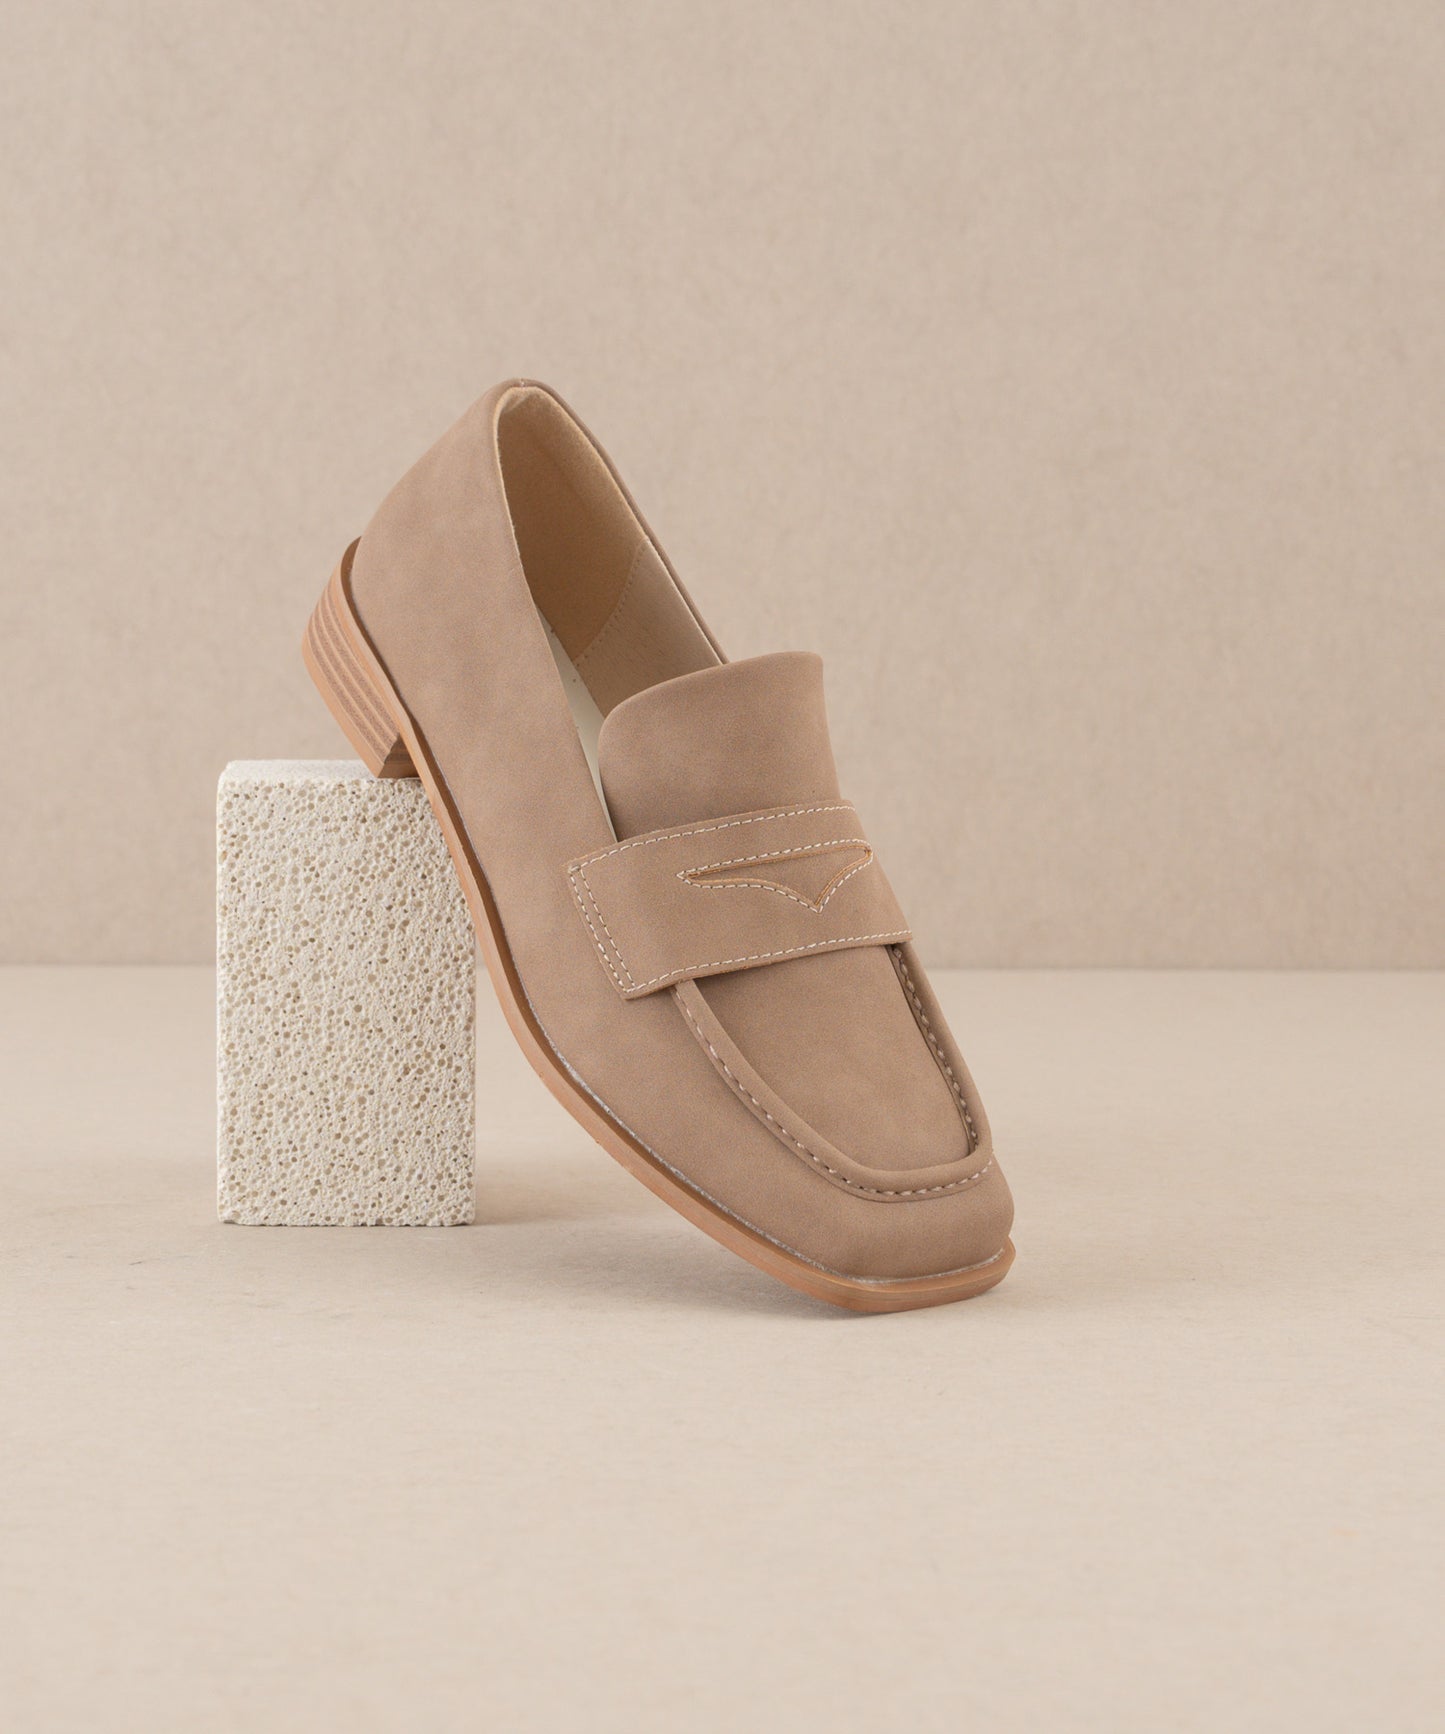 The June - Cedar Wood Classic square toe penny loafer